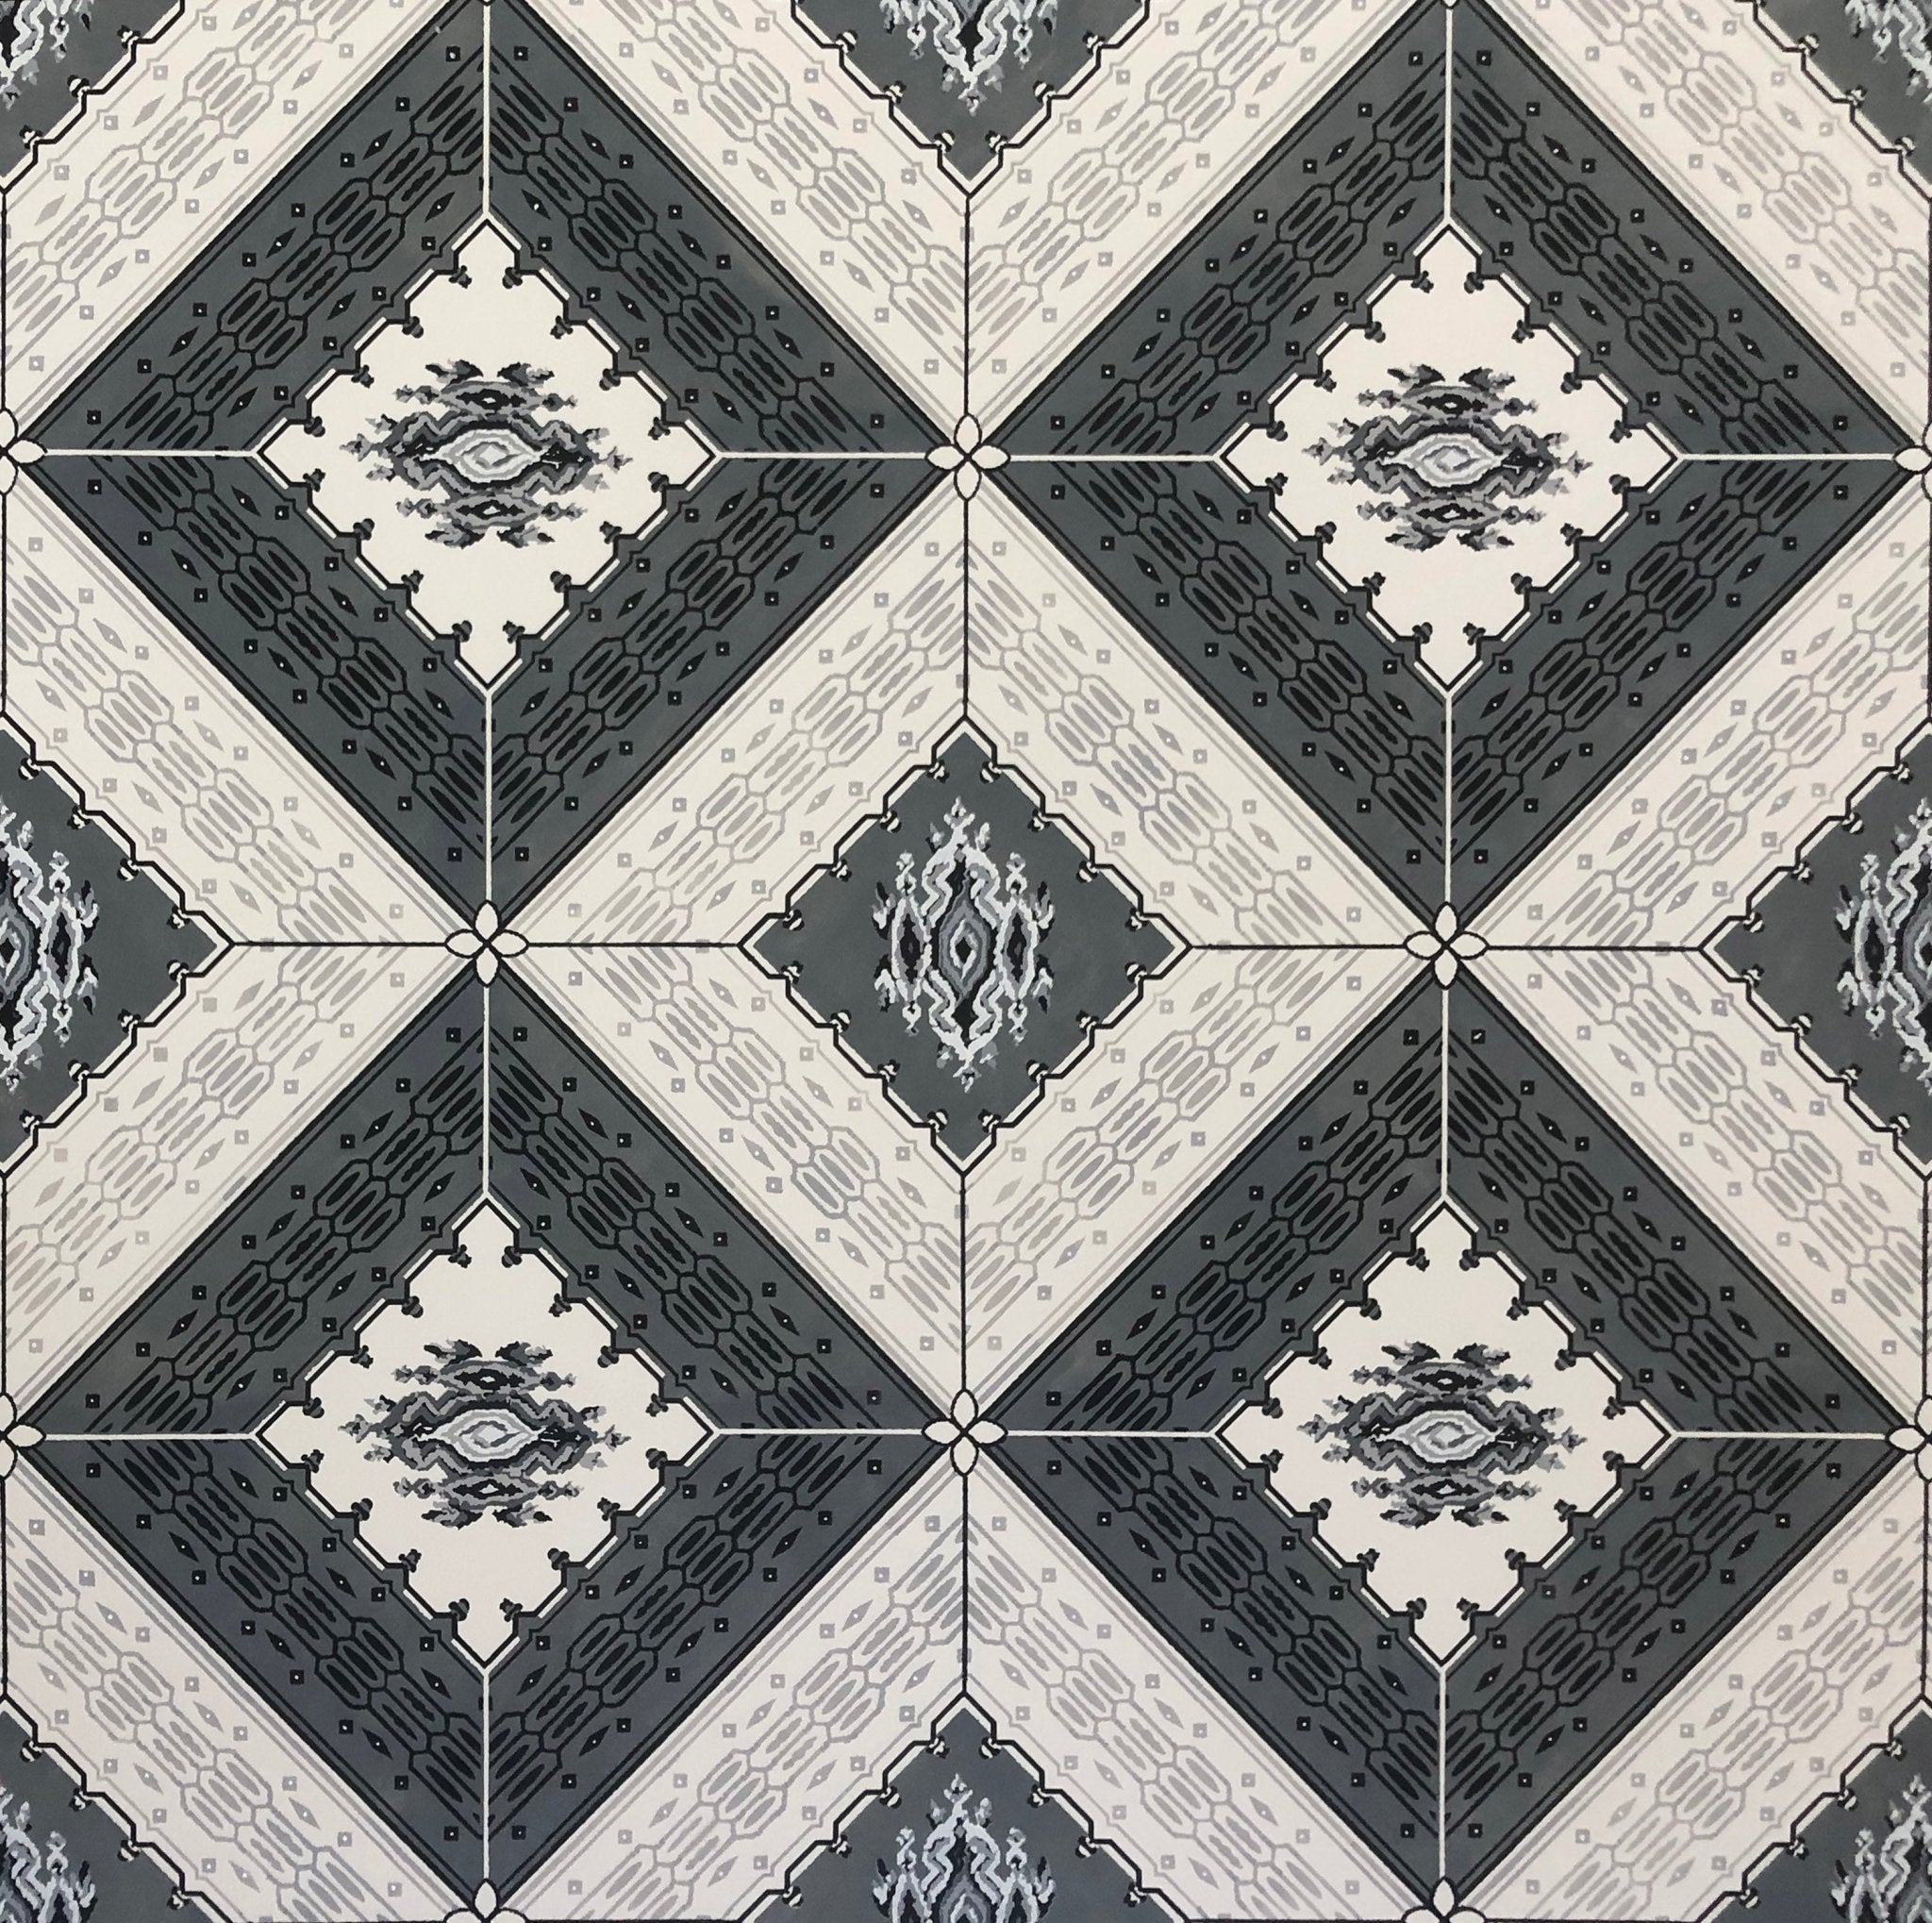 A close up of the alternating diamond array for Melrose Floorcloth #1.